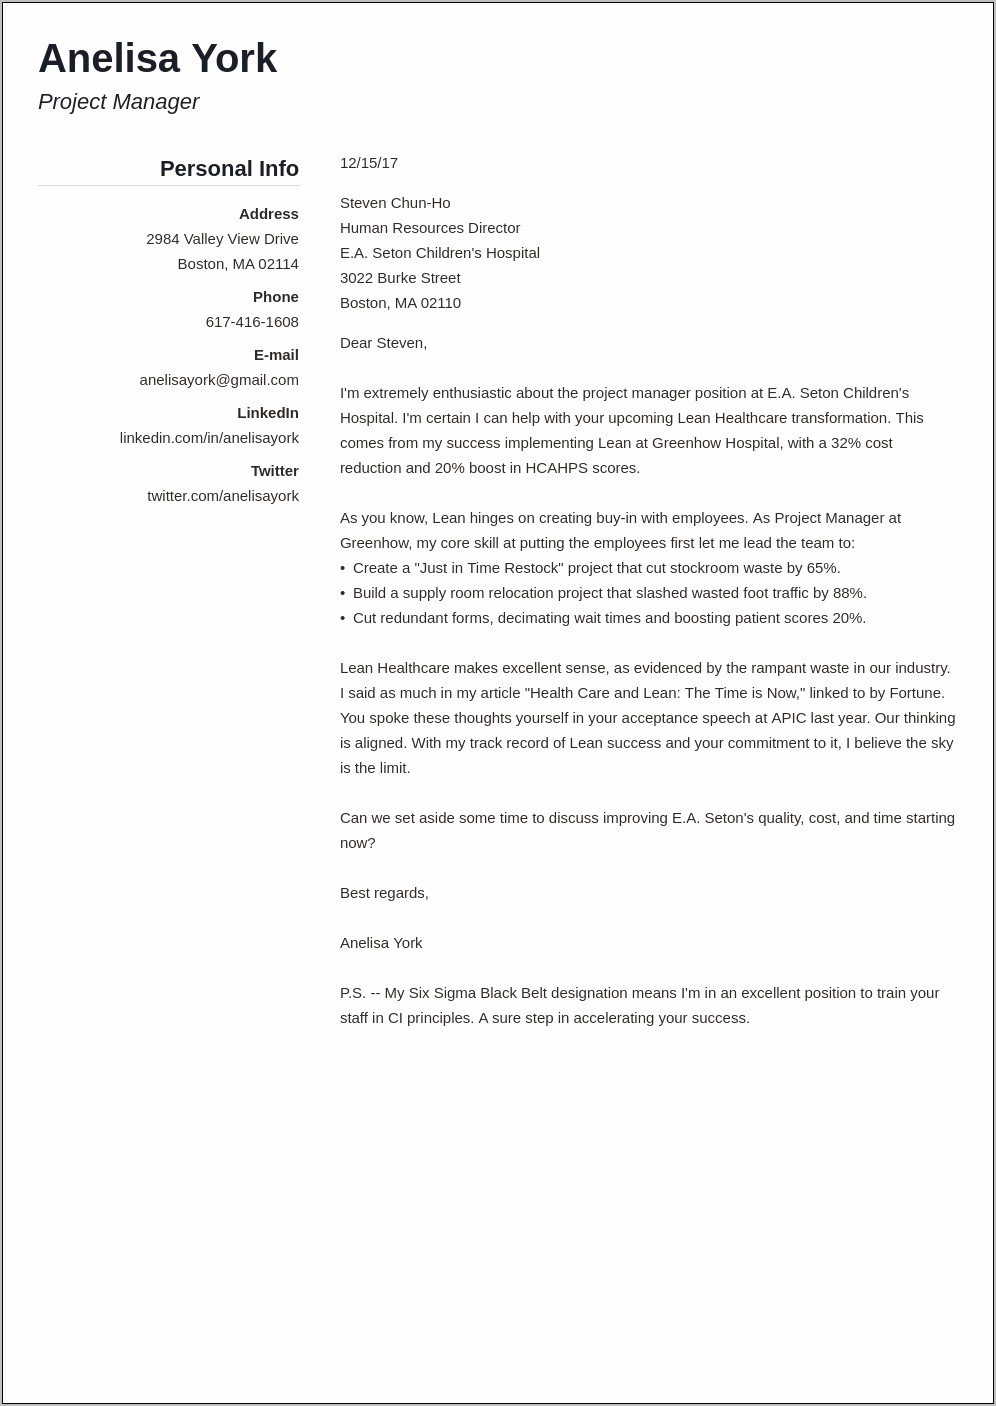 Long Email Attach Cover Letter And Resume